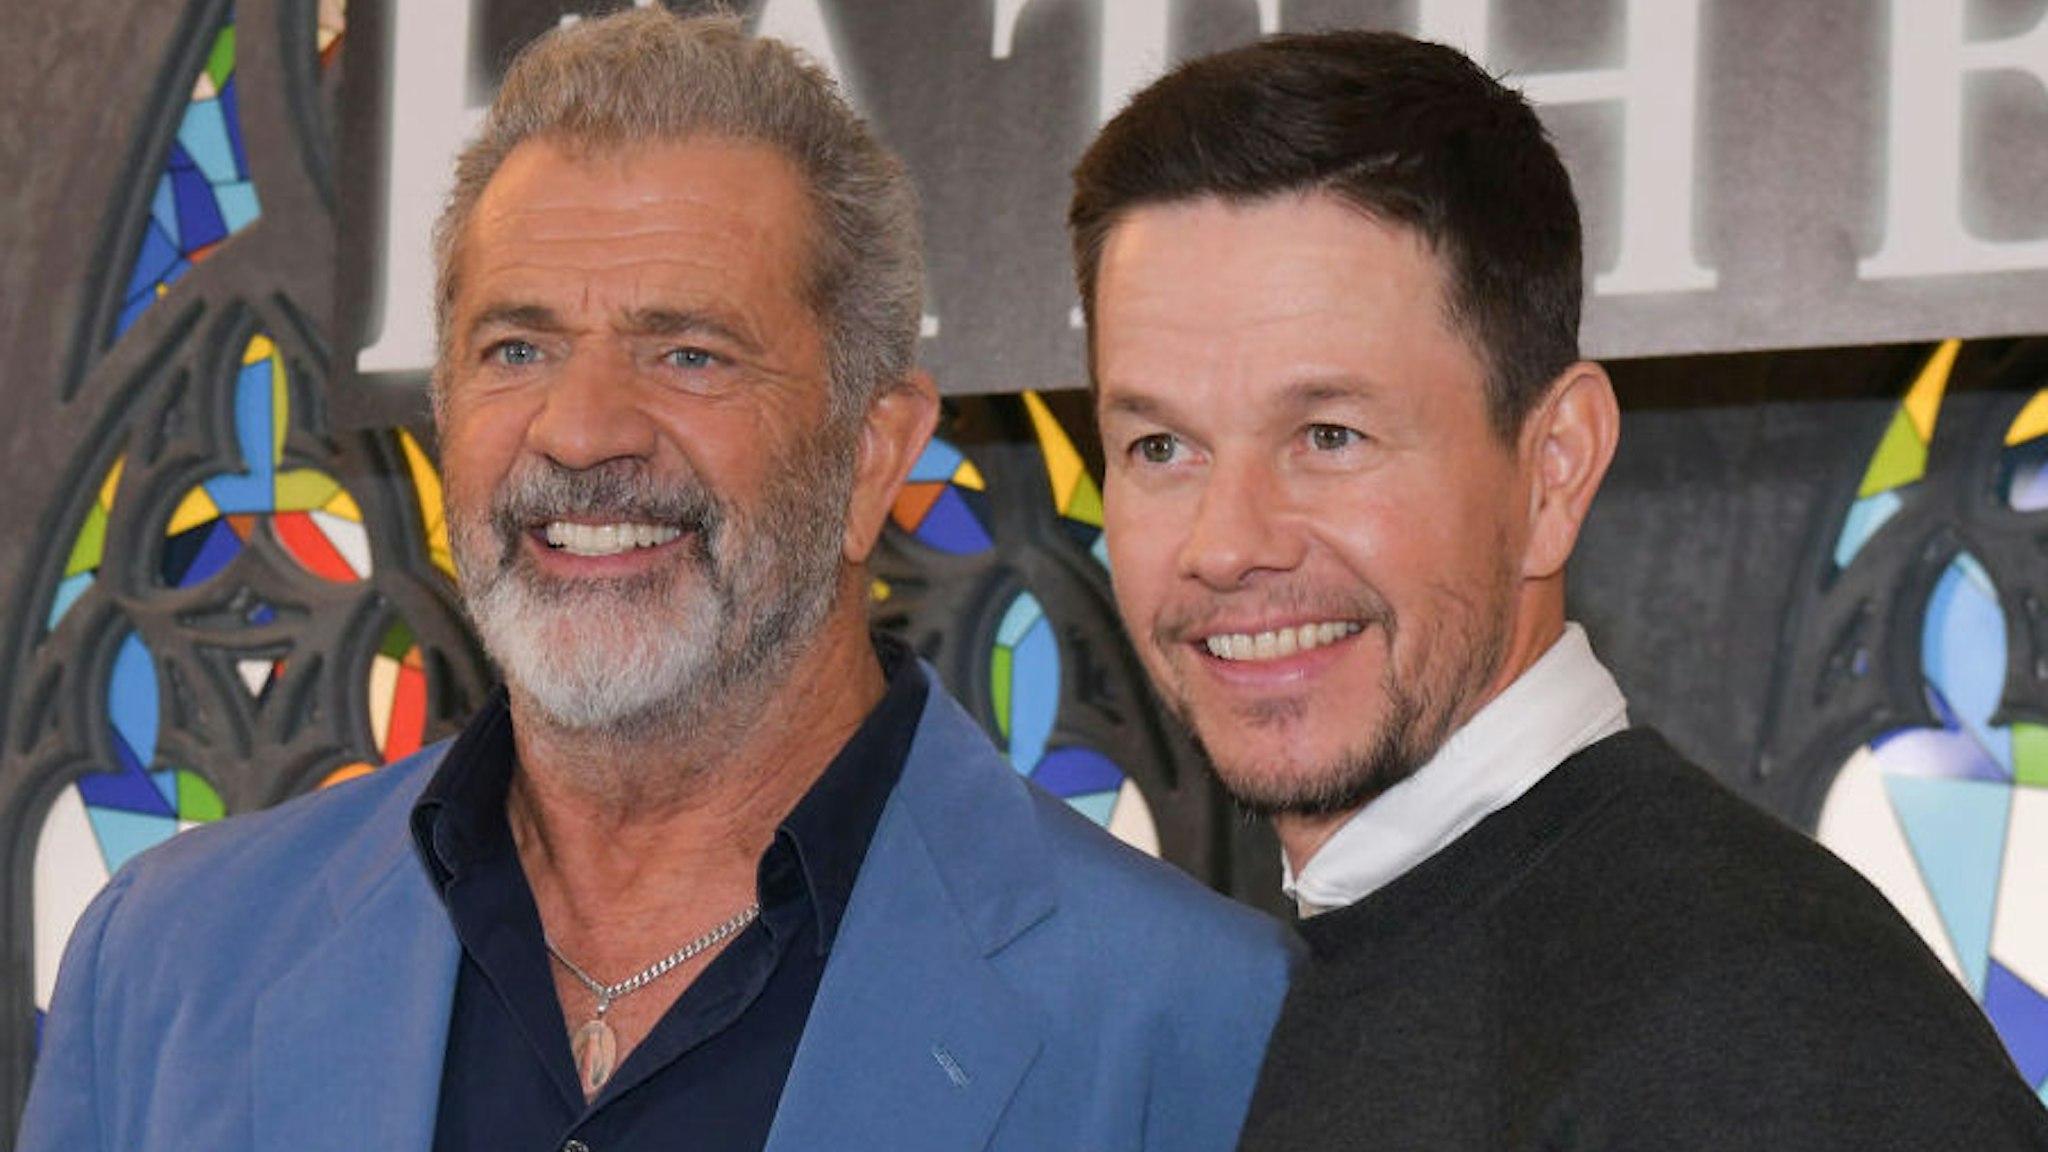 Mel Gibson and Mark Wahlberg attend Columbia Pictures' "Father Stu" Photo Call at The London West Hollywood at Beverly Hills on April 01, 2022 in West Hollywood, California.